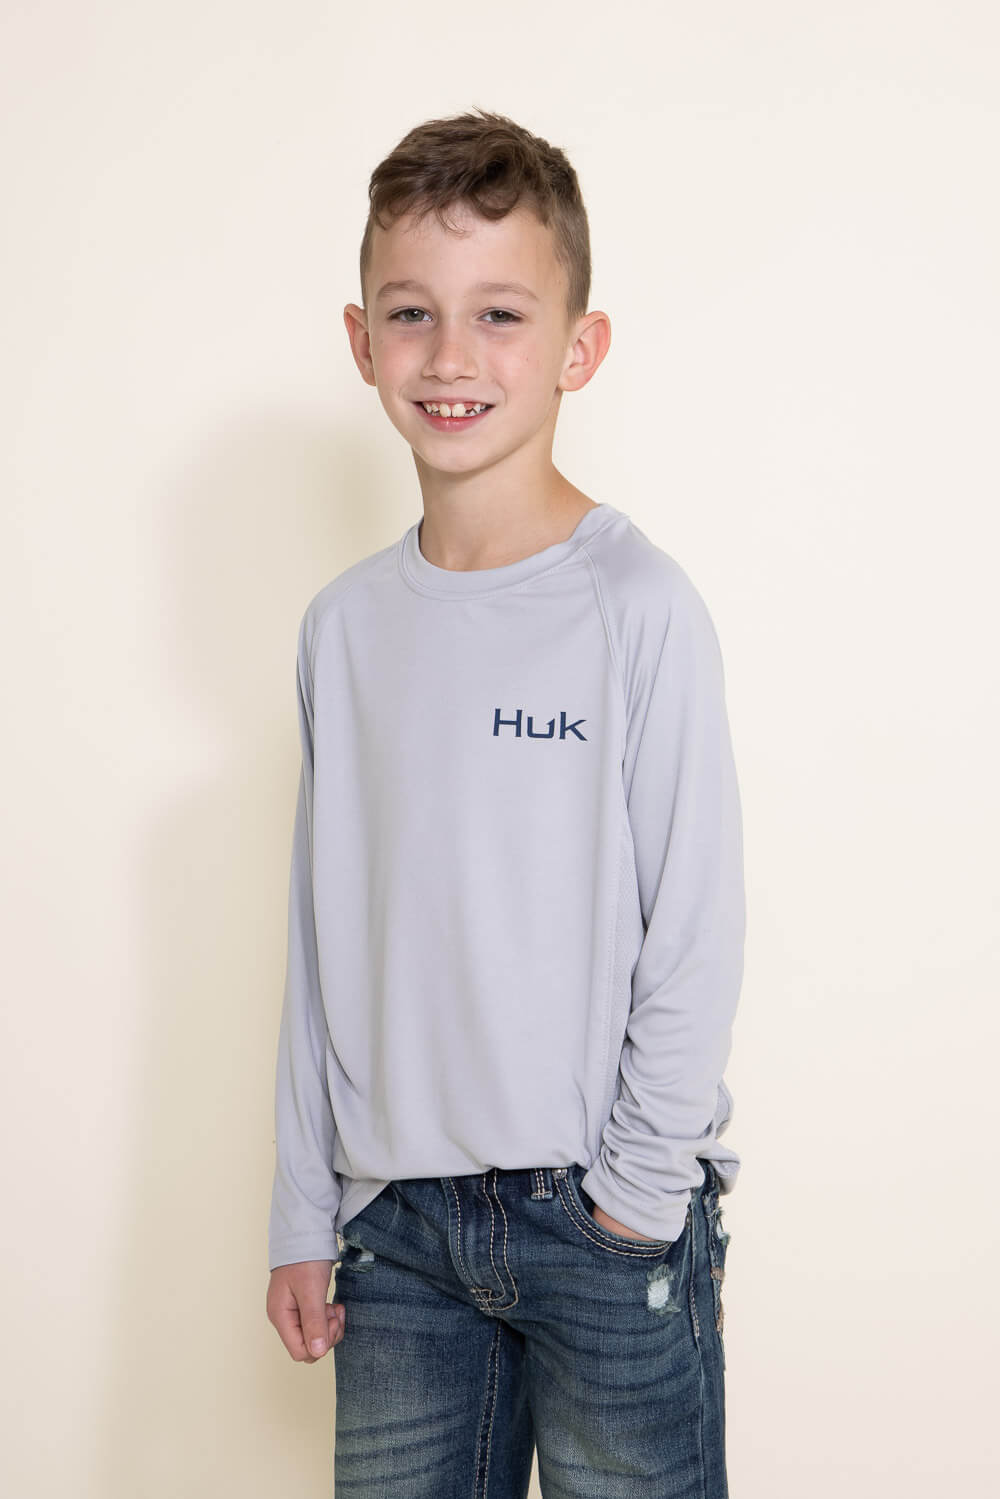 HUK Long Sleeve Youth Pursuit Solid Tee Shirt H7120091- CHOOSE